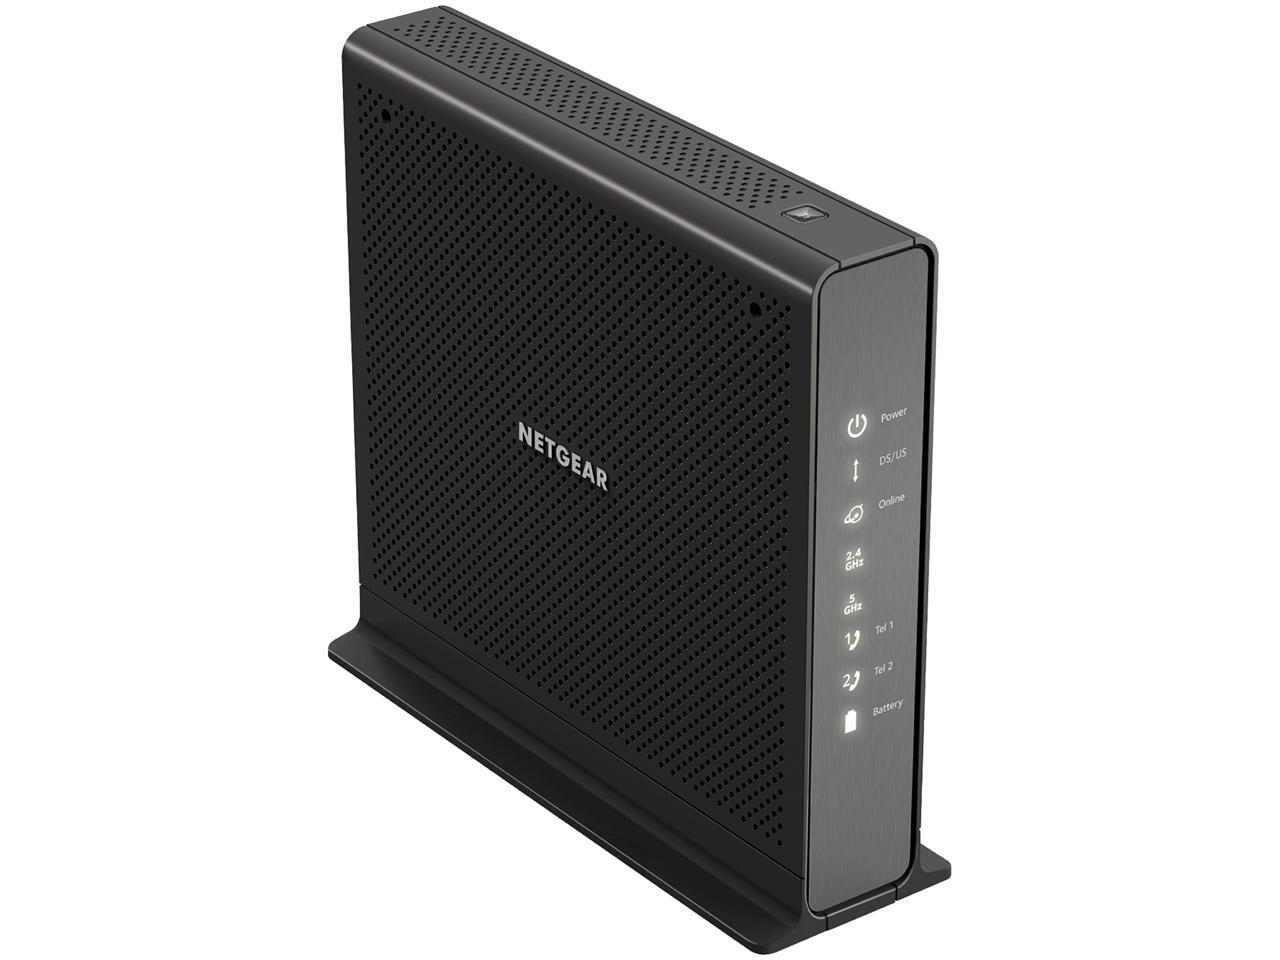 NETGEAR Nighthawk AC1900 (24x8) DOCSIS 3.0 Wi-Fi Cable Modem Router For